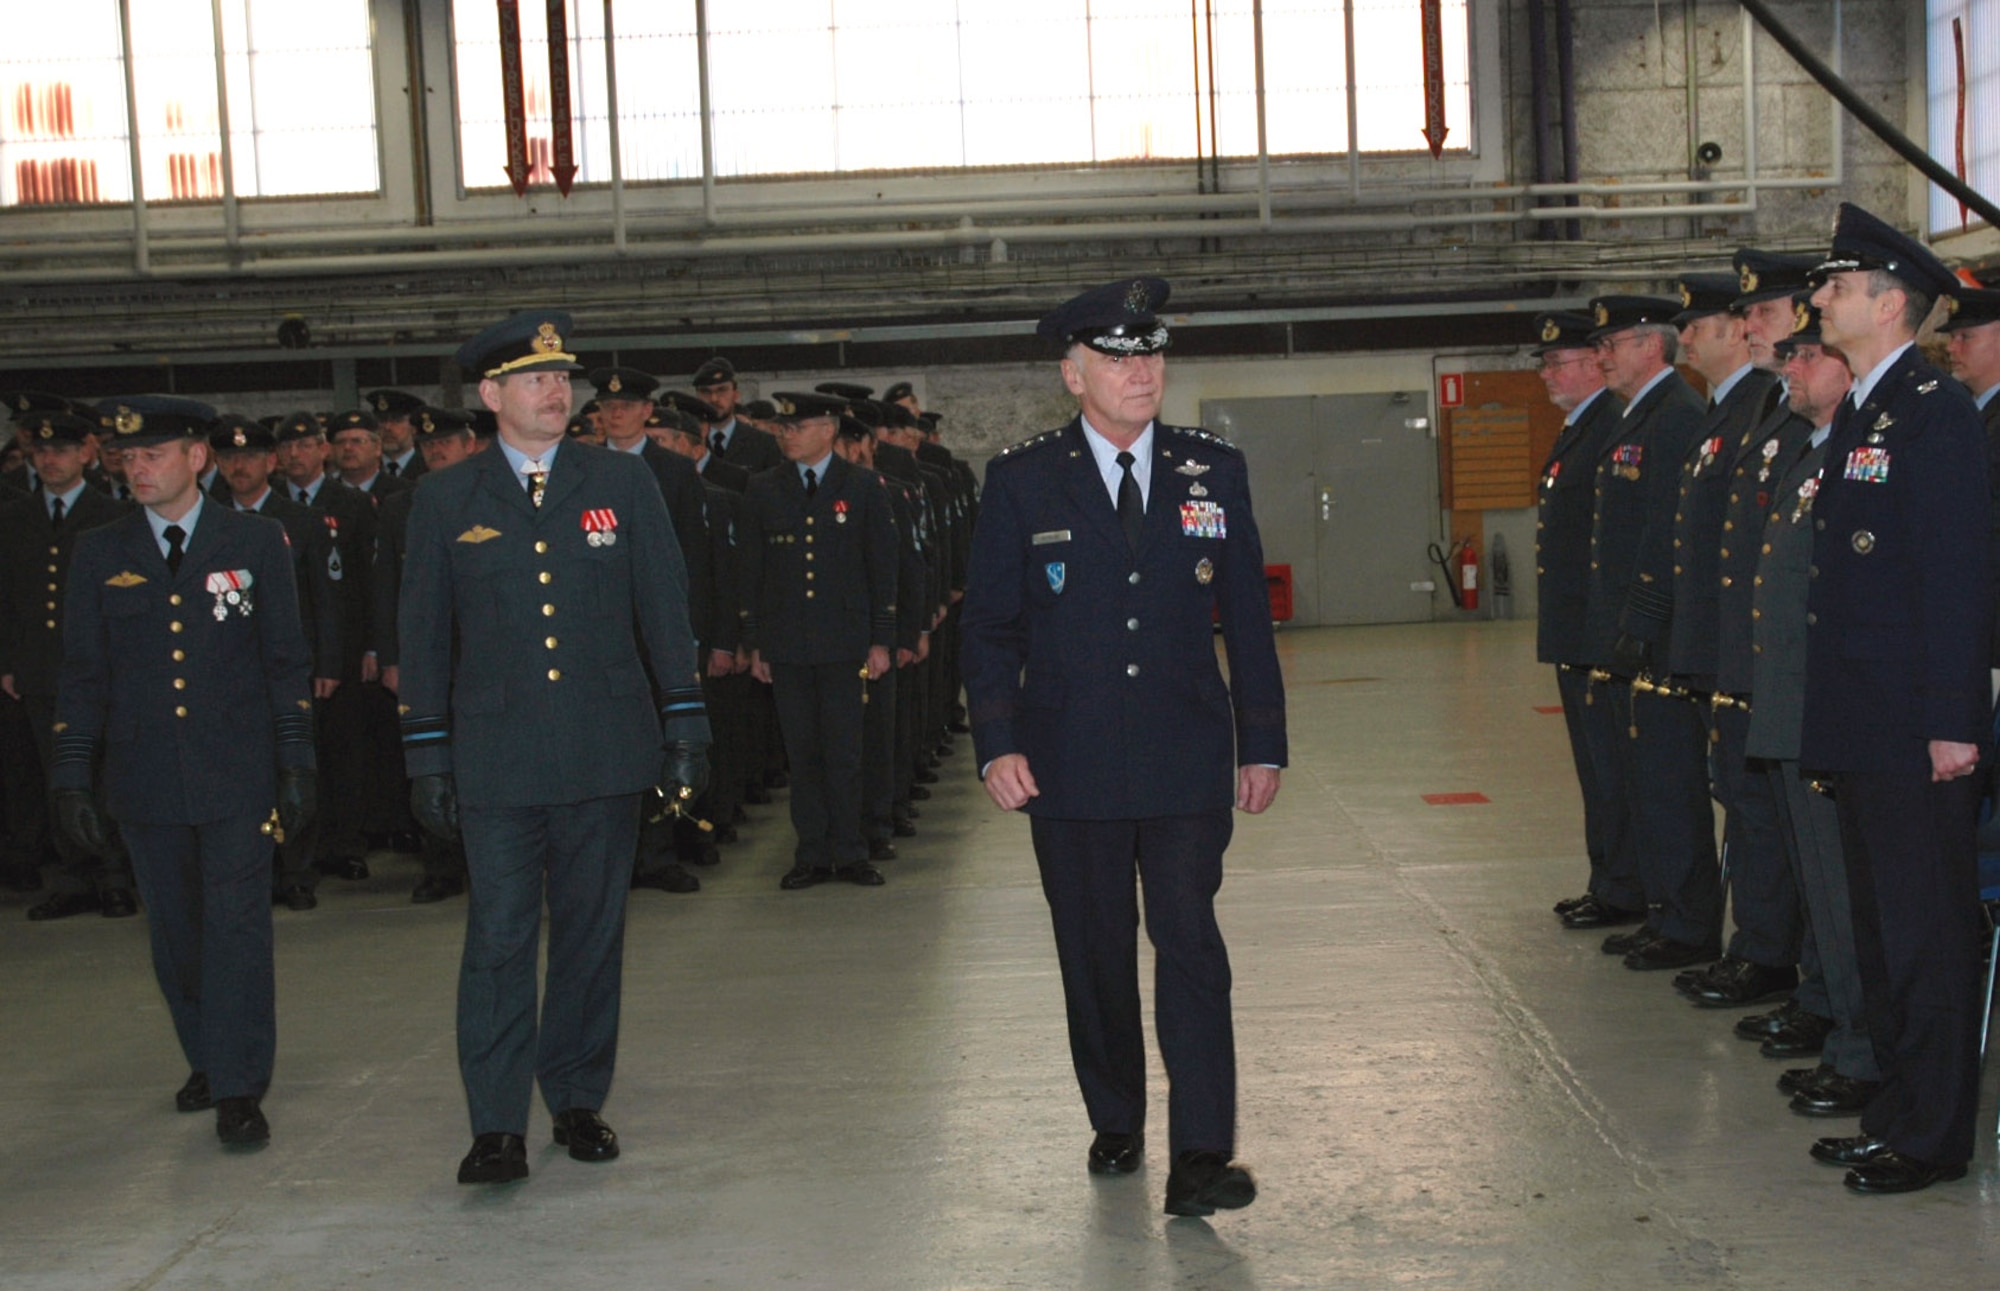 Gen. William T. Hobbins marches in an award ceremony Jan. 2 at Fighter Wing Skrydstrup, Denmark. During the ceremony, General Hobbins presented 35 U.S. Air Medals to Danish F-16 pilots who flew in support of Operation Enduring Freedom from October 2002 to October 2003. General Hobbins is the U.S. Air Forces in Europe commander. (U.S. Air Force photo/Maj. Krista Carlos)